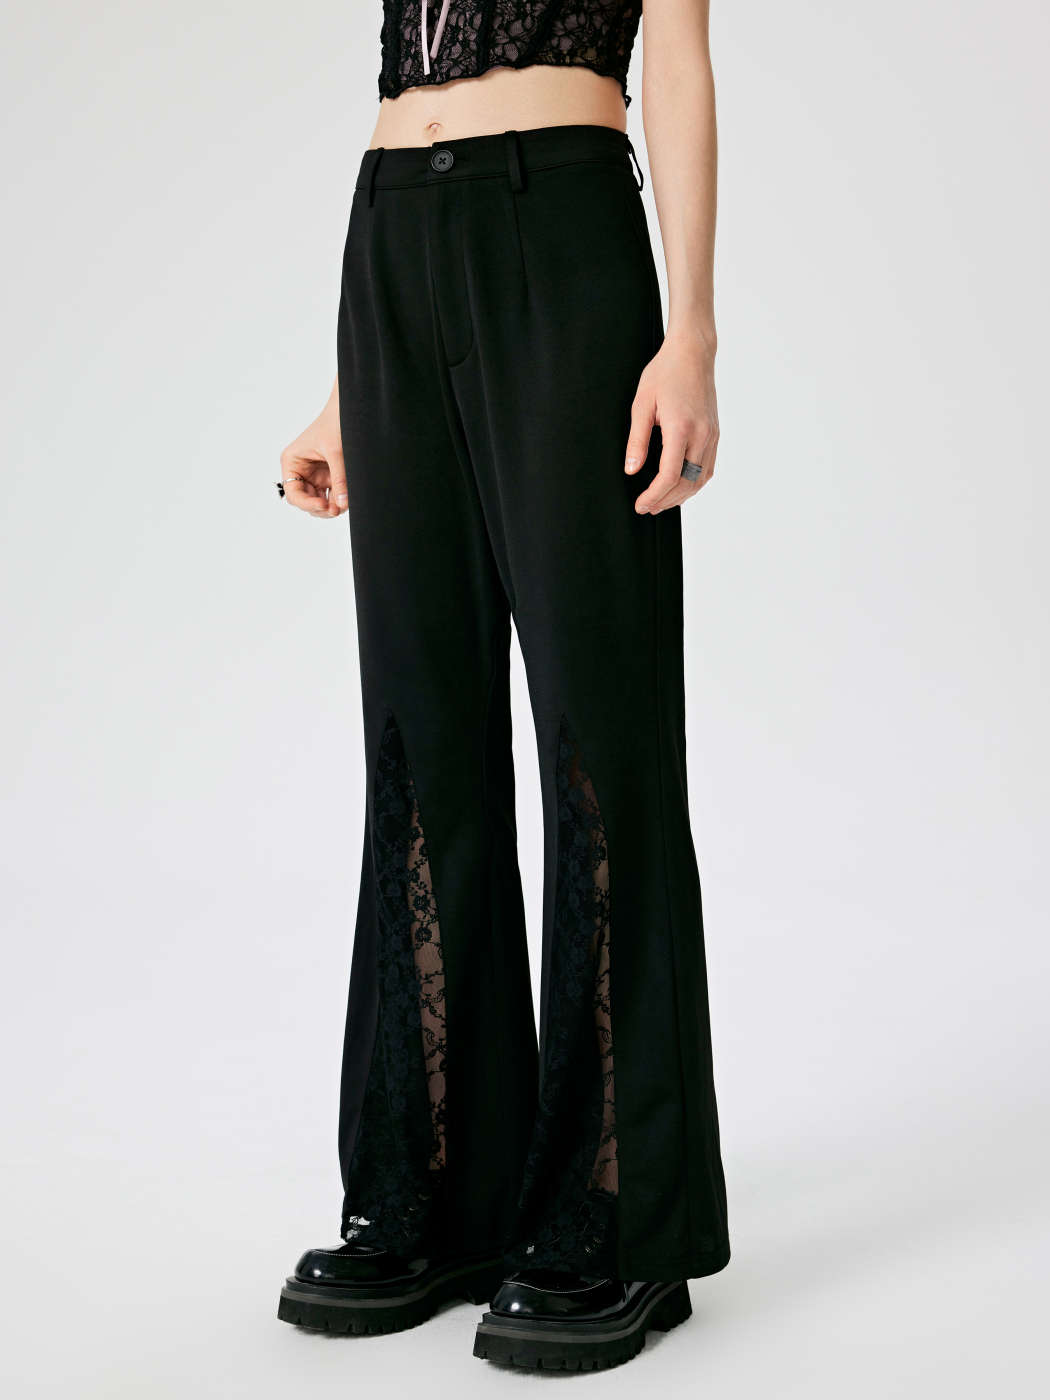 Lace High Waisted Flare Pants